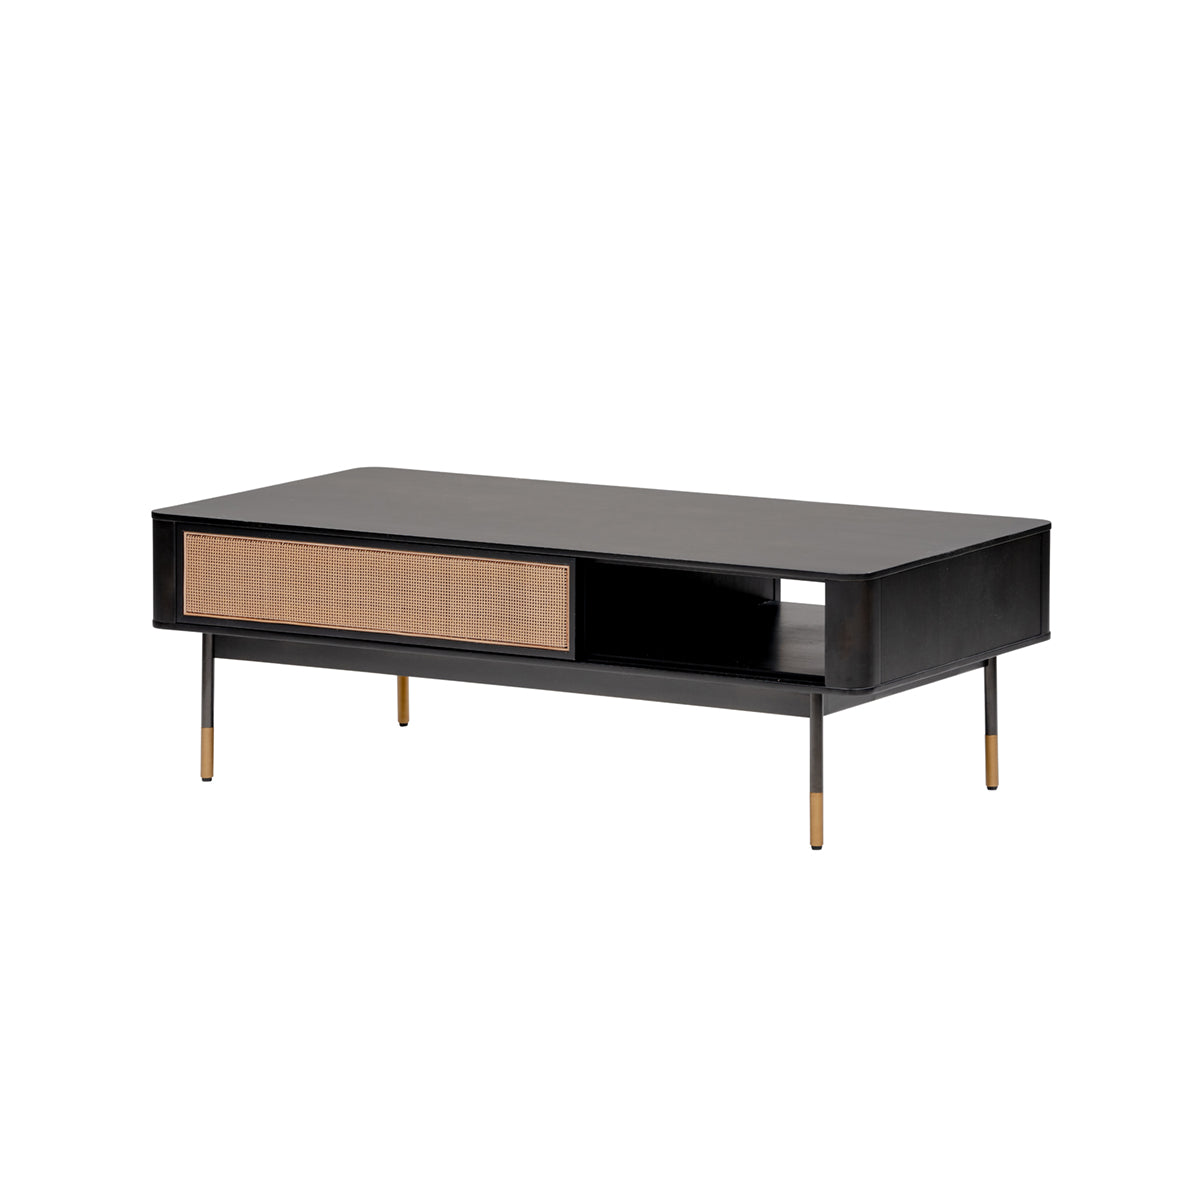 47" Black and Brown Solid Wood Coffee Table with Drawer and Shelf